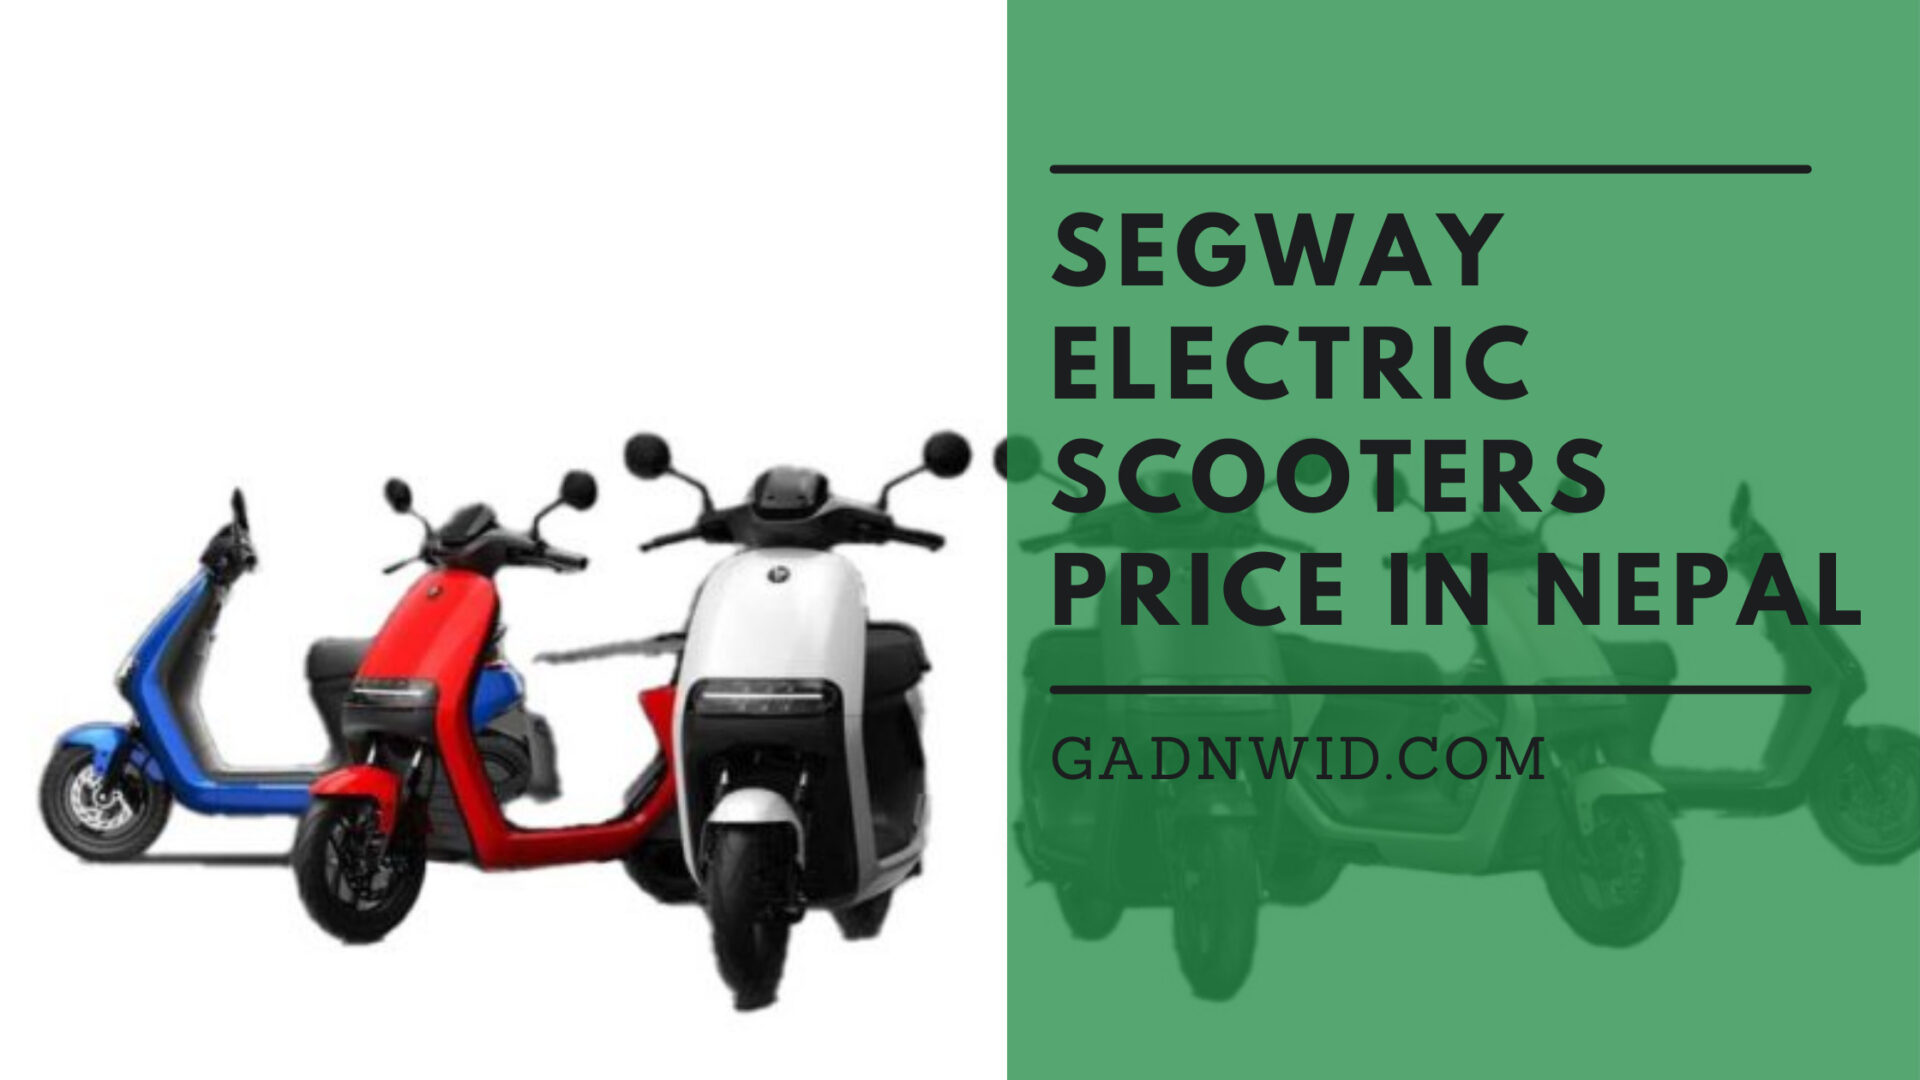 Segway Electric Scooters Price in Nepal